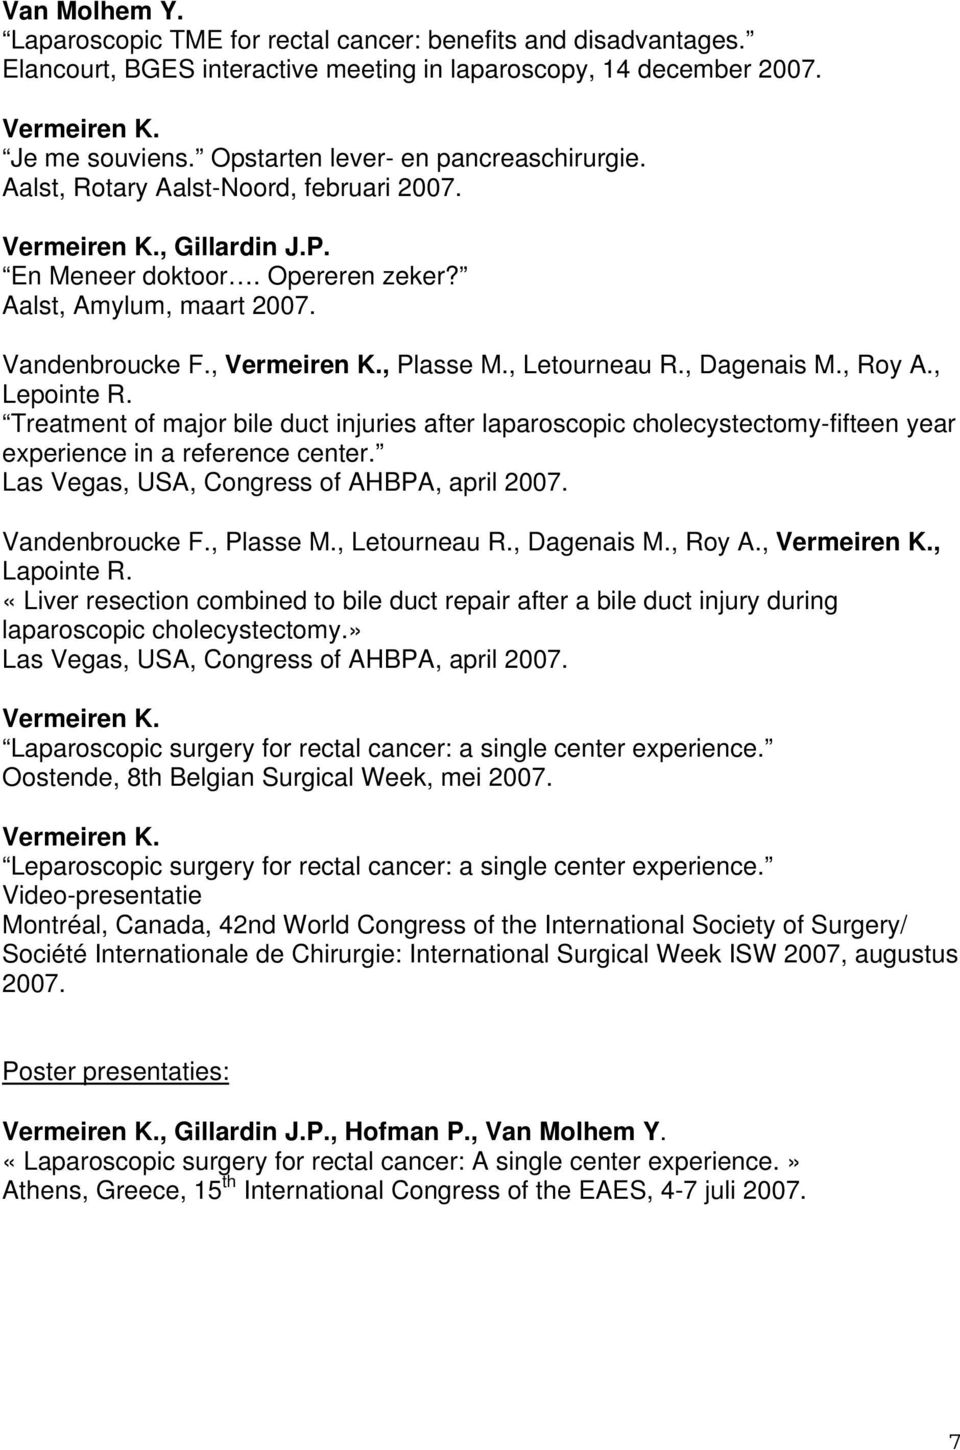 , Vermeiren K., Plasse M., Letourneau R., Dagenais M., Roy A., Lepointe R. Treatment of major bile duct injuries after laparoscopic cholecystectomy-fifteen year experience in a reference center.